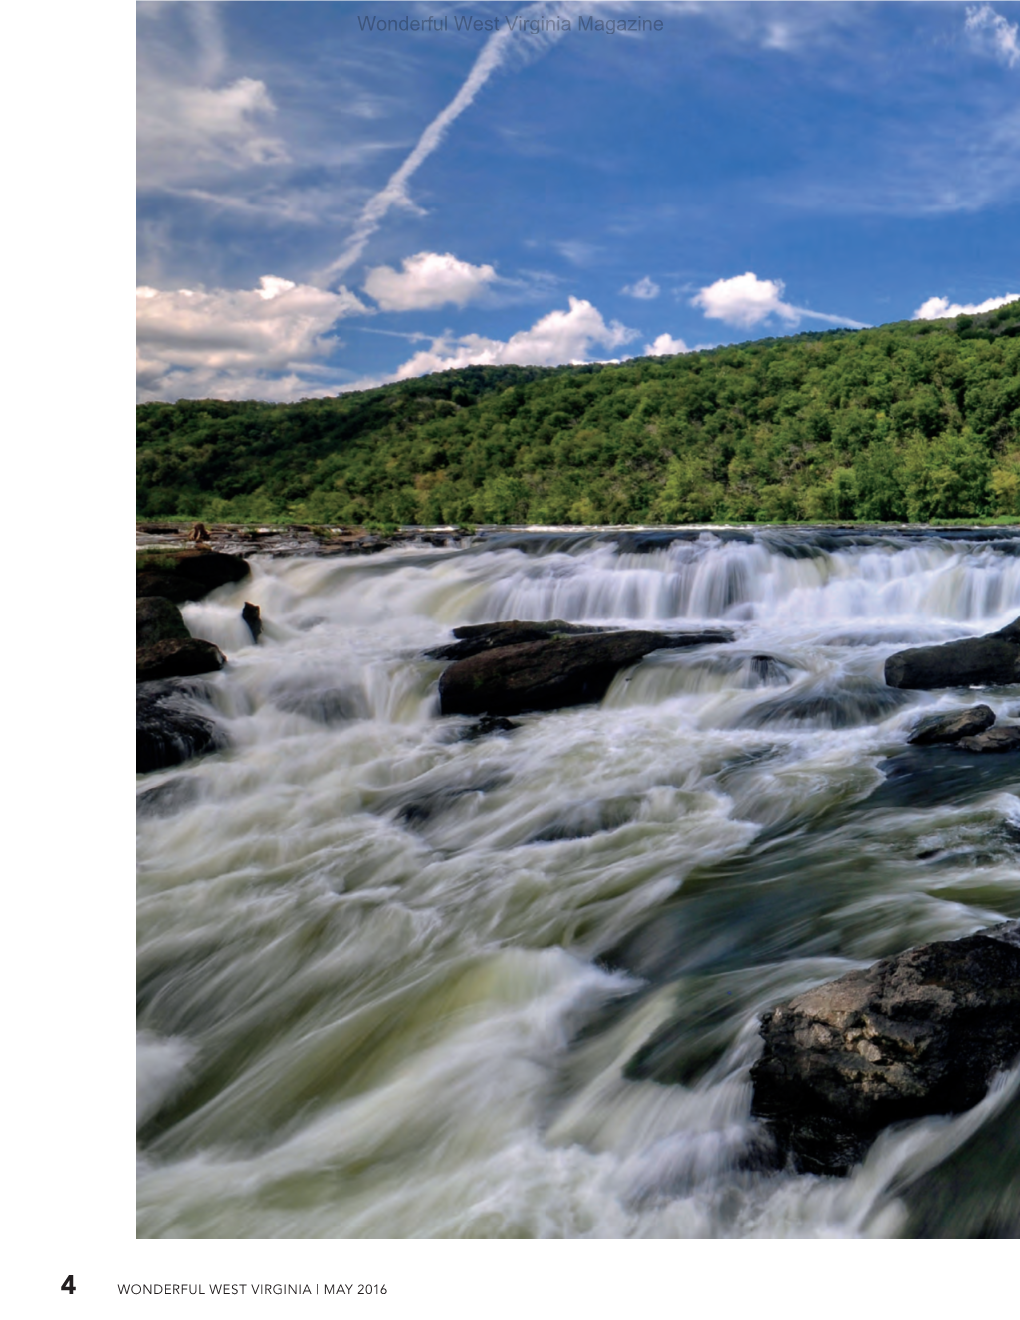 FALLING WATERS West Virginia Is Rich with Waterfalls, Giving Springtime a Splashy Show